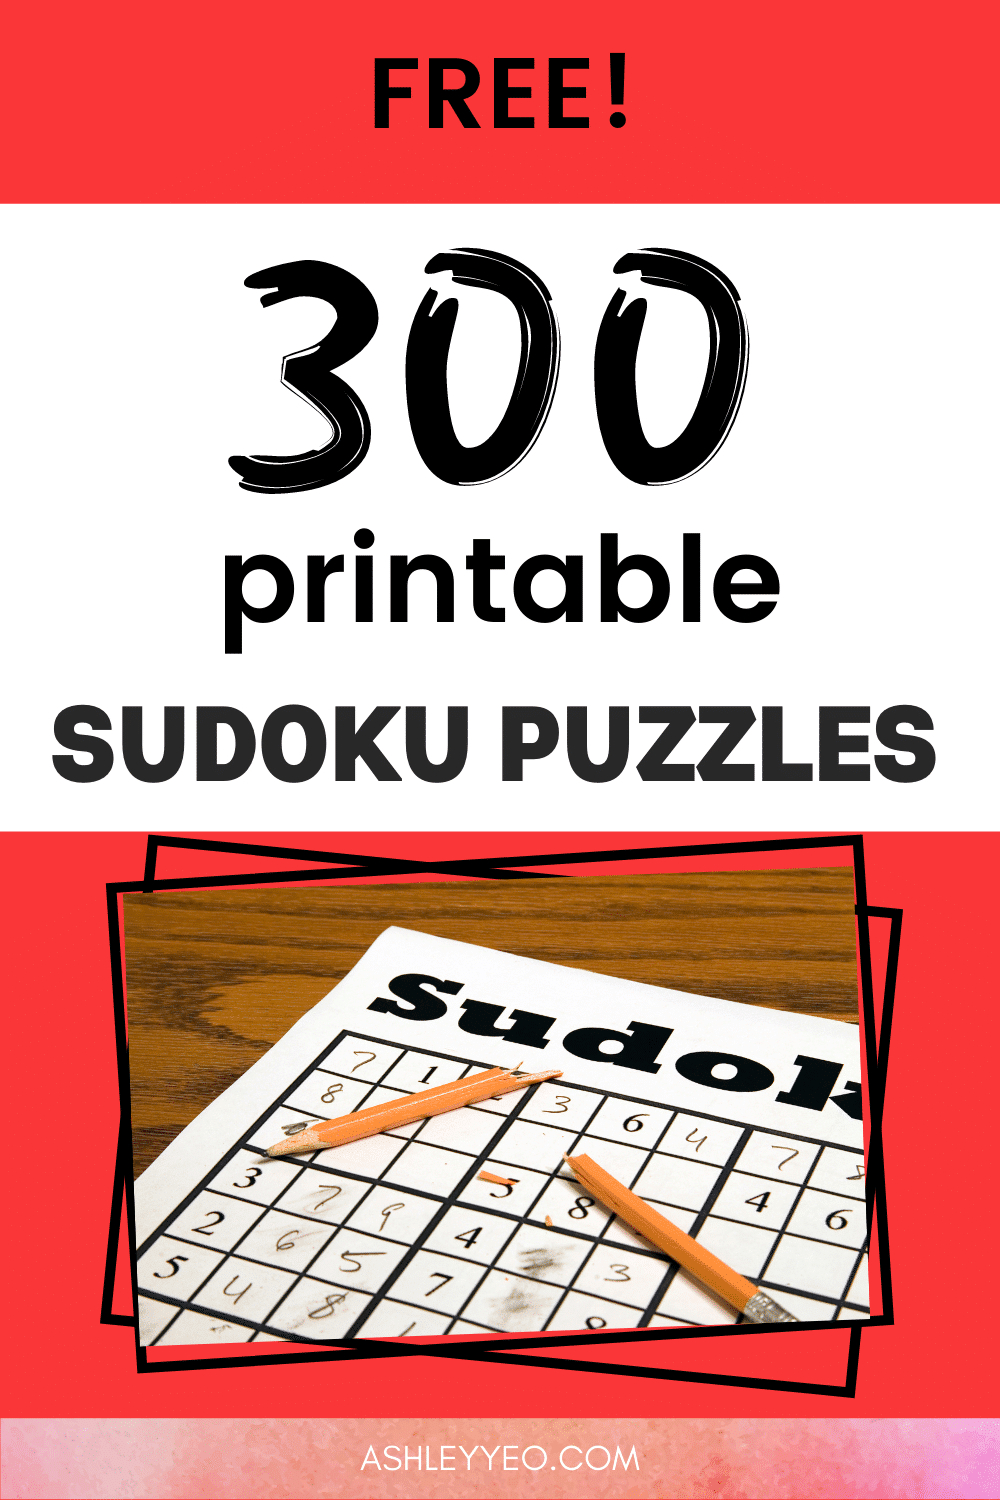 300 Free Printable Sudoku Puzzles For Your Family - Ashley Yeo intended for Download Printable Sudoku Puzzles Free